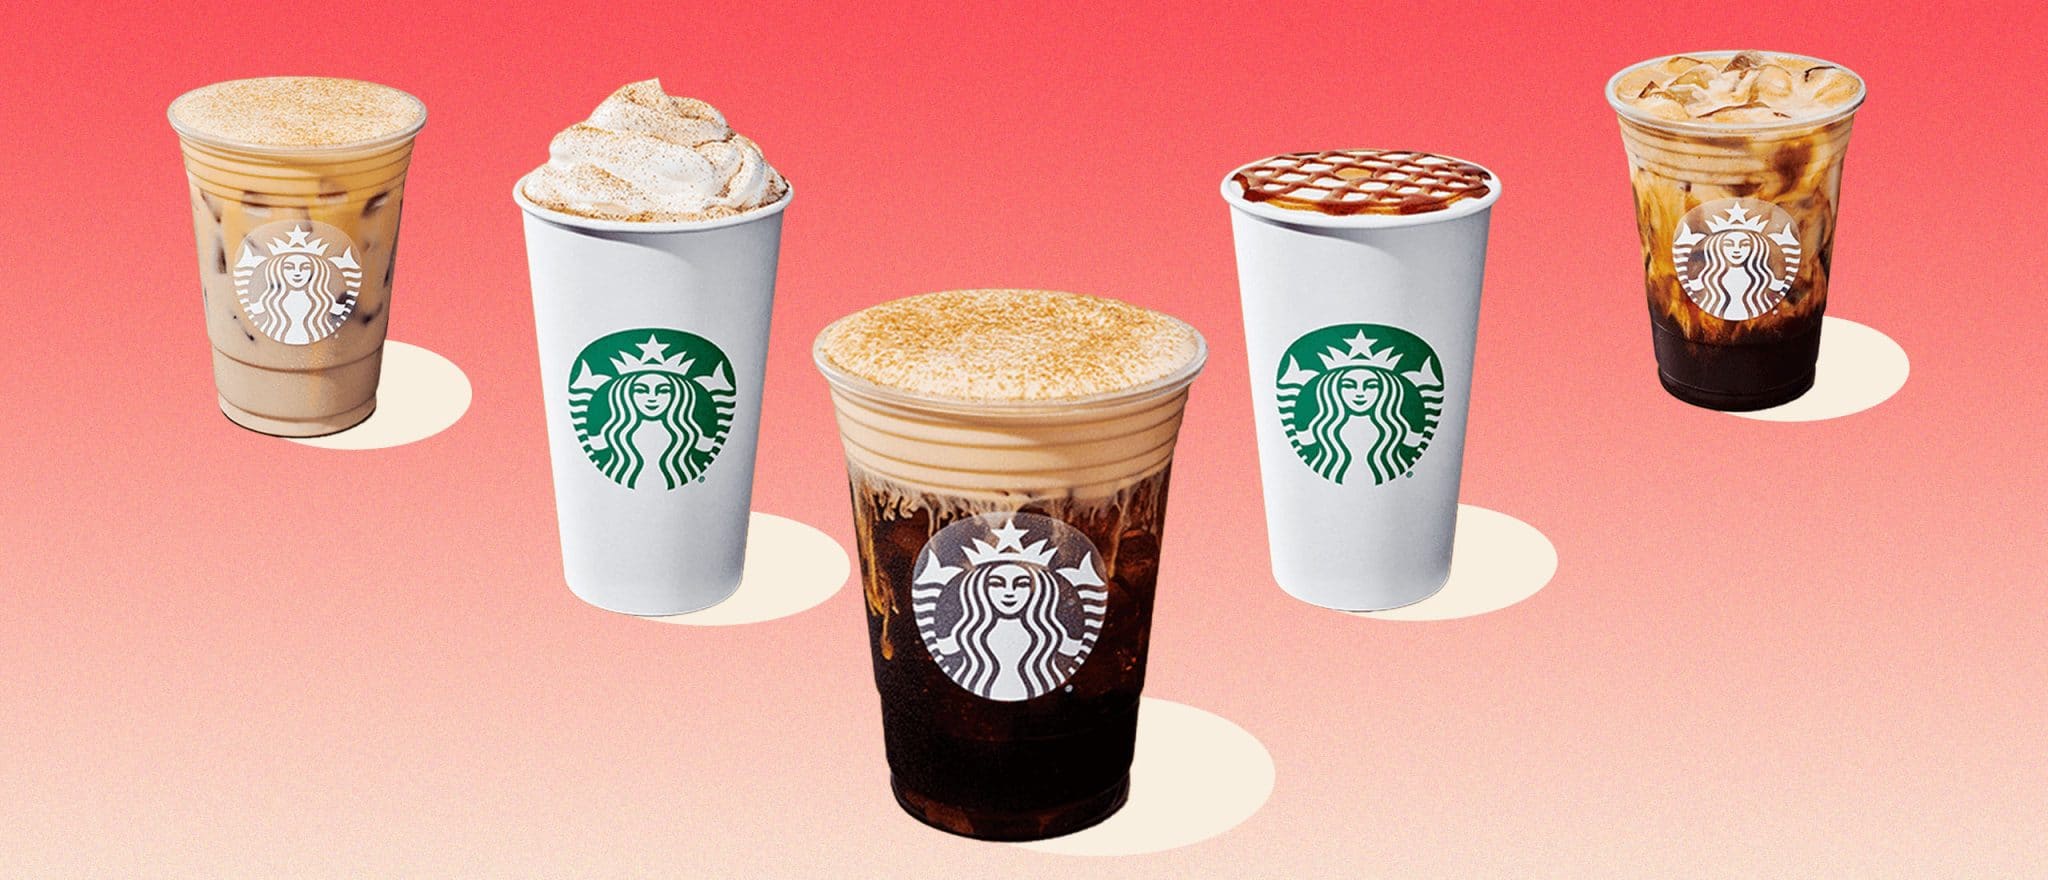 Starbucks’ Pumpkin Cream Cold Brew Is Healthier Than the PSL, But Is It Actually Healthy?